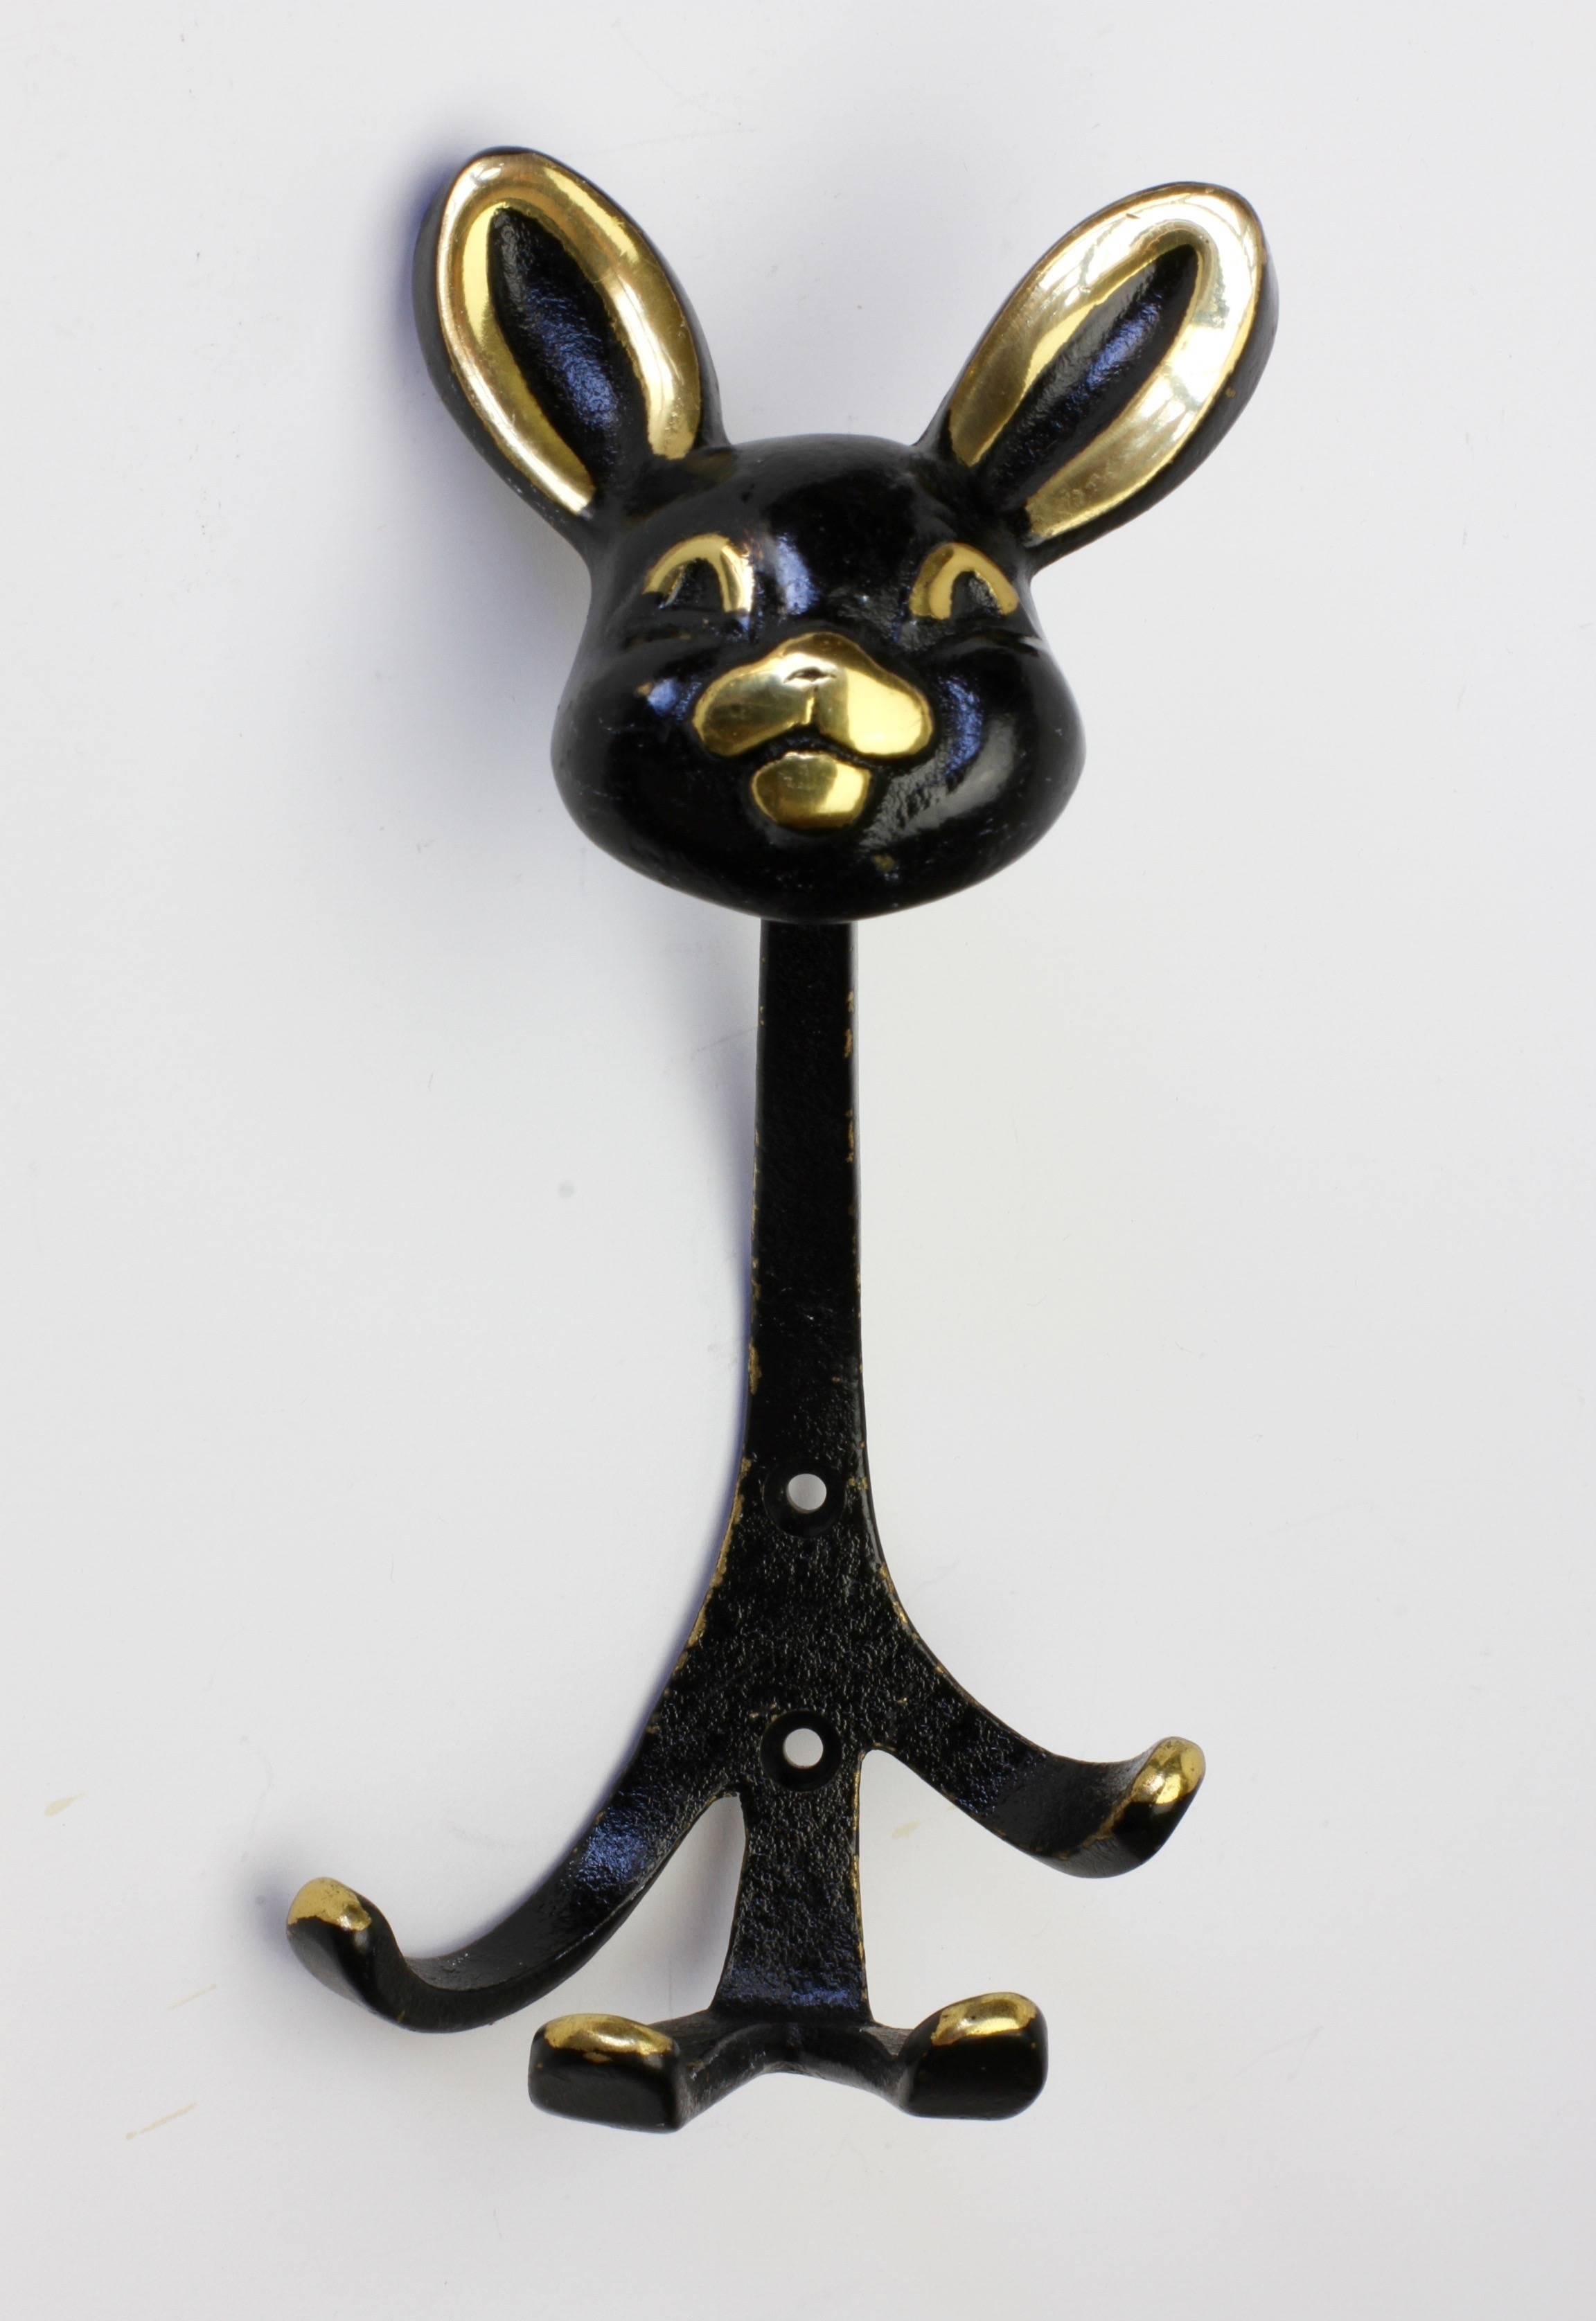 A rare Walter Bosse hook in the form of a rabbit. What better way is there to bring some joy into a room than with a fabulous brass wall hook by Walter Bosse. Whether a hallway, bathroom of children's bedroom/playroom, this delightful hook is almost